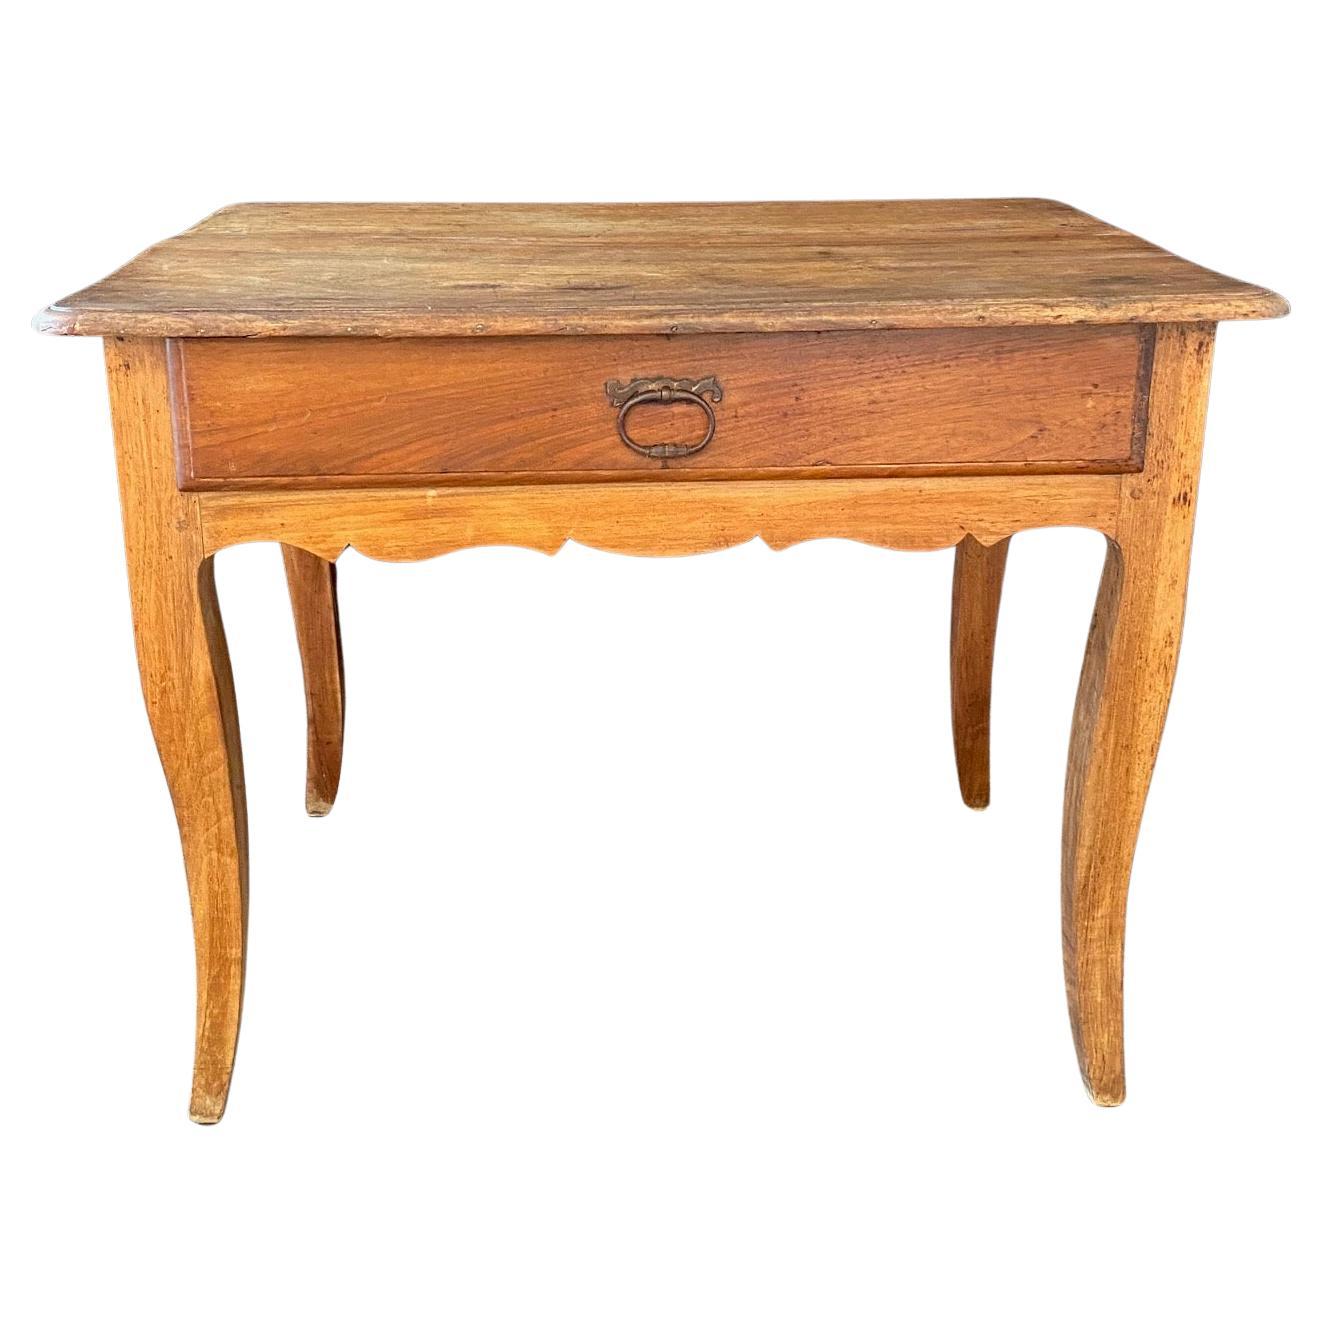 French Provincial Walnut Antique Side Table